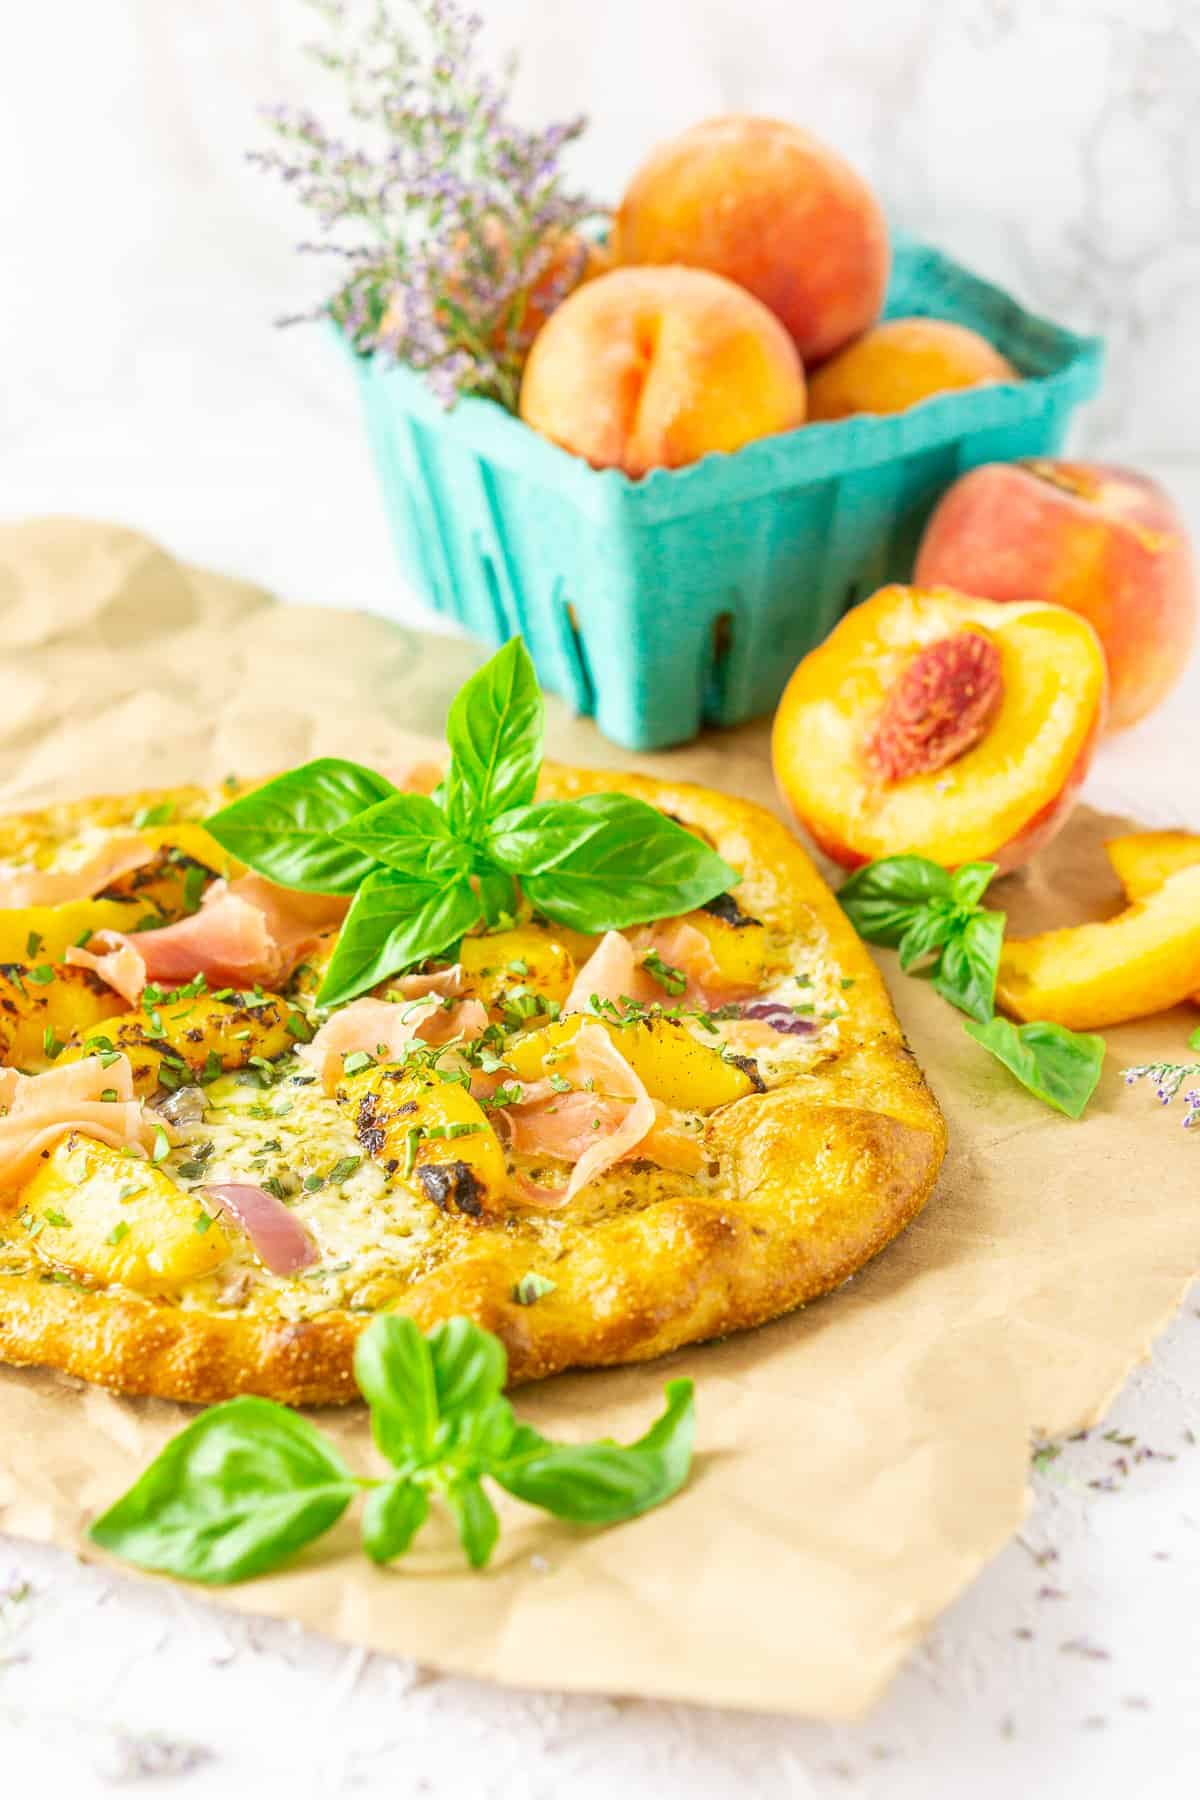 A grilled peach pizza on parchment paper with fresh peaches and purple flowers.